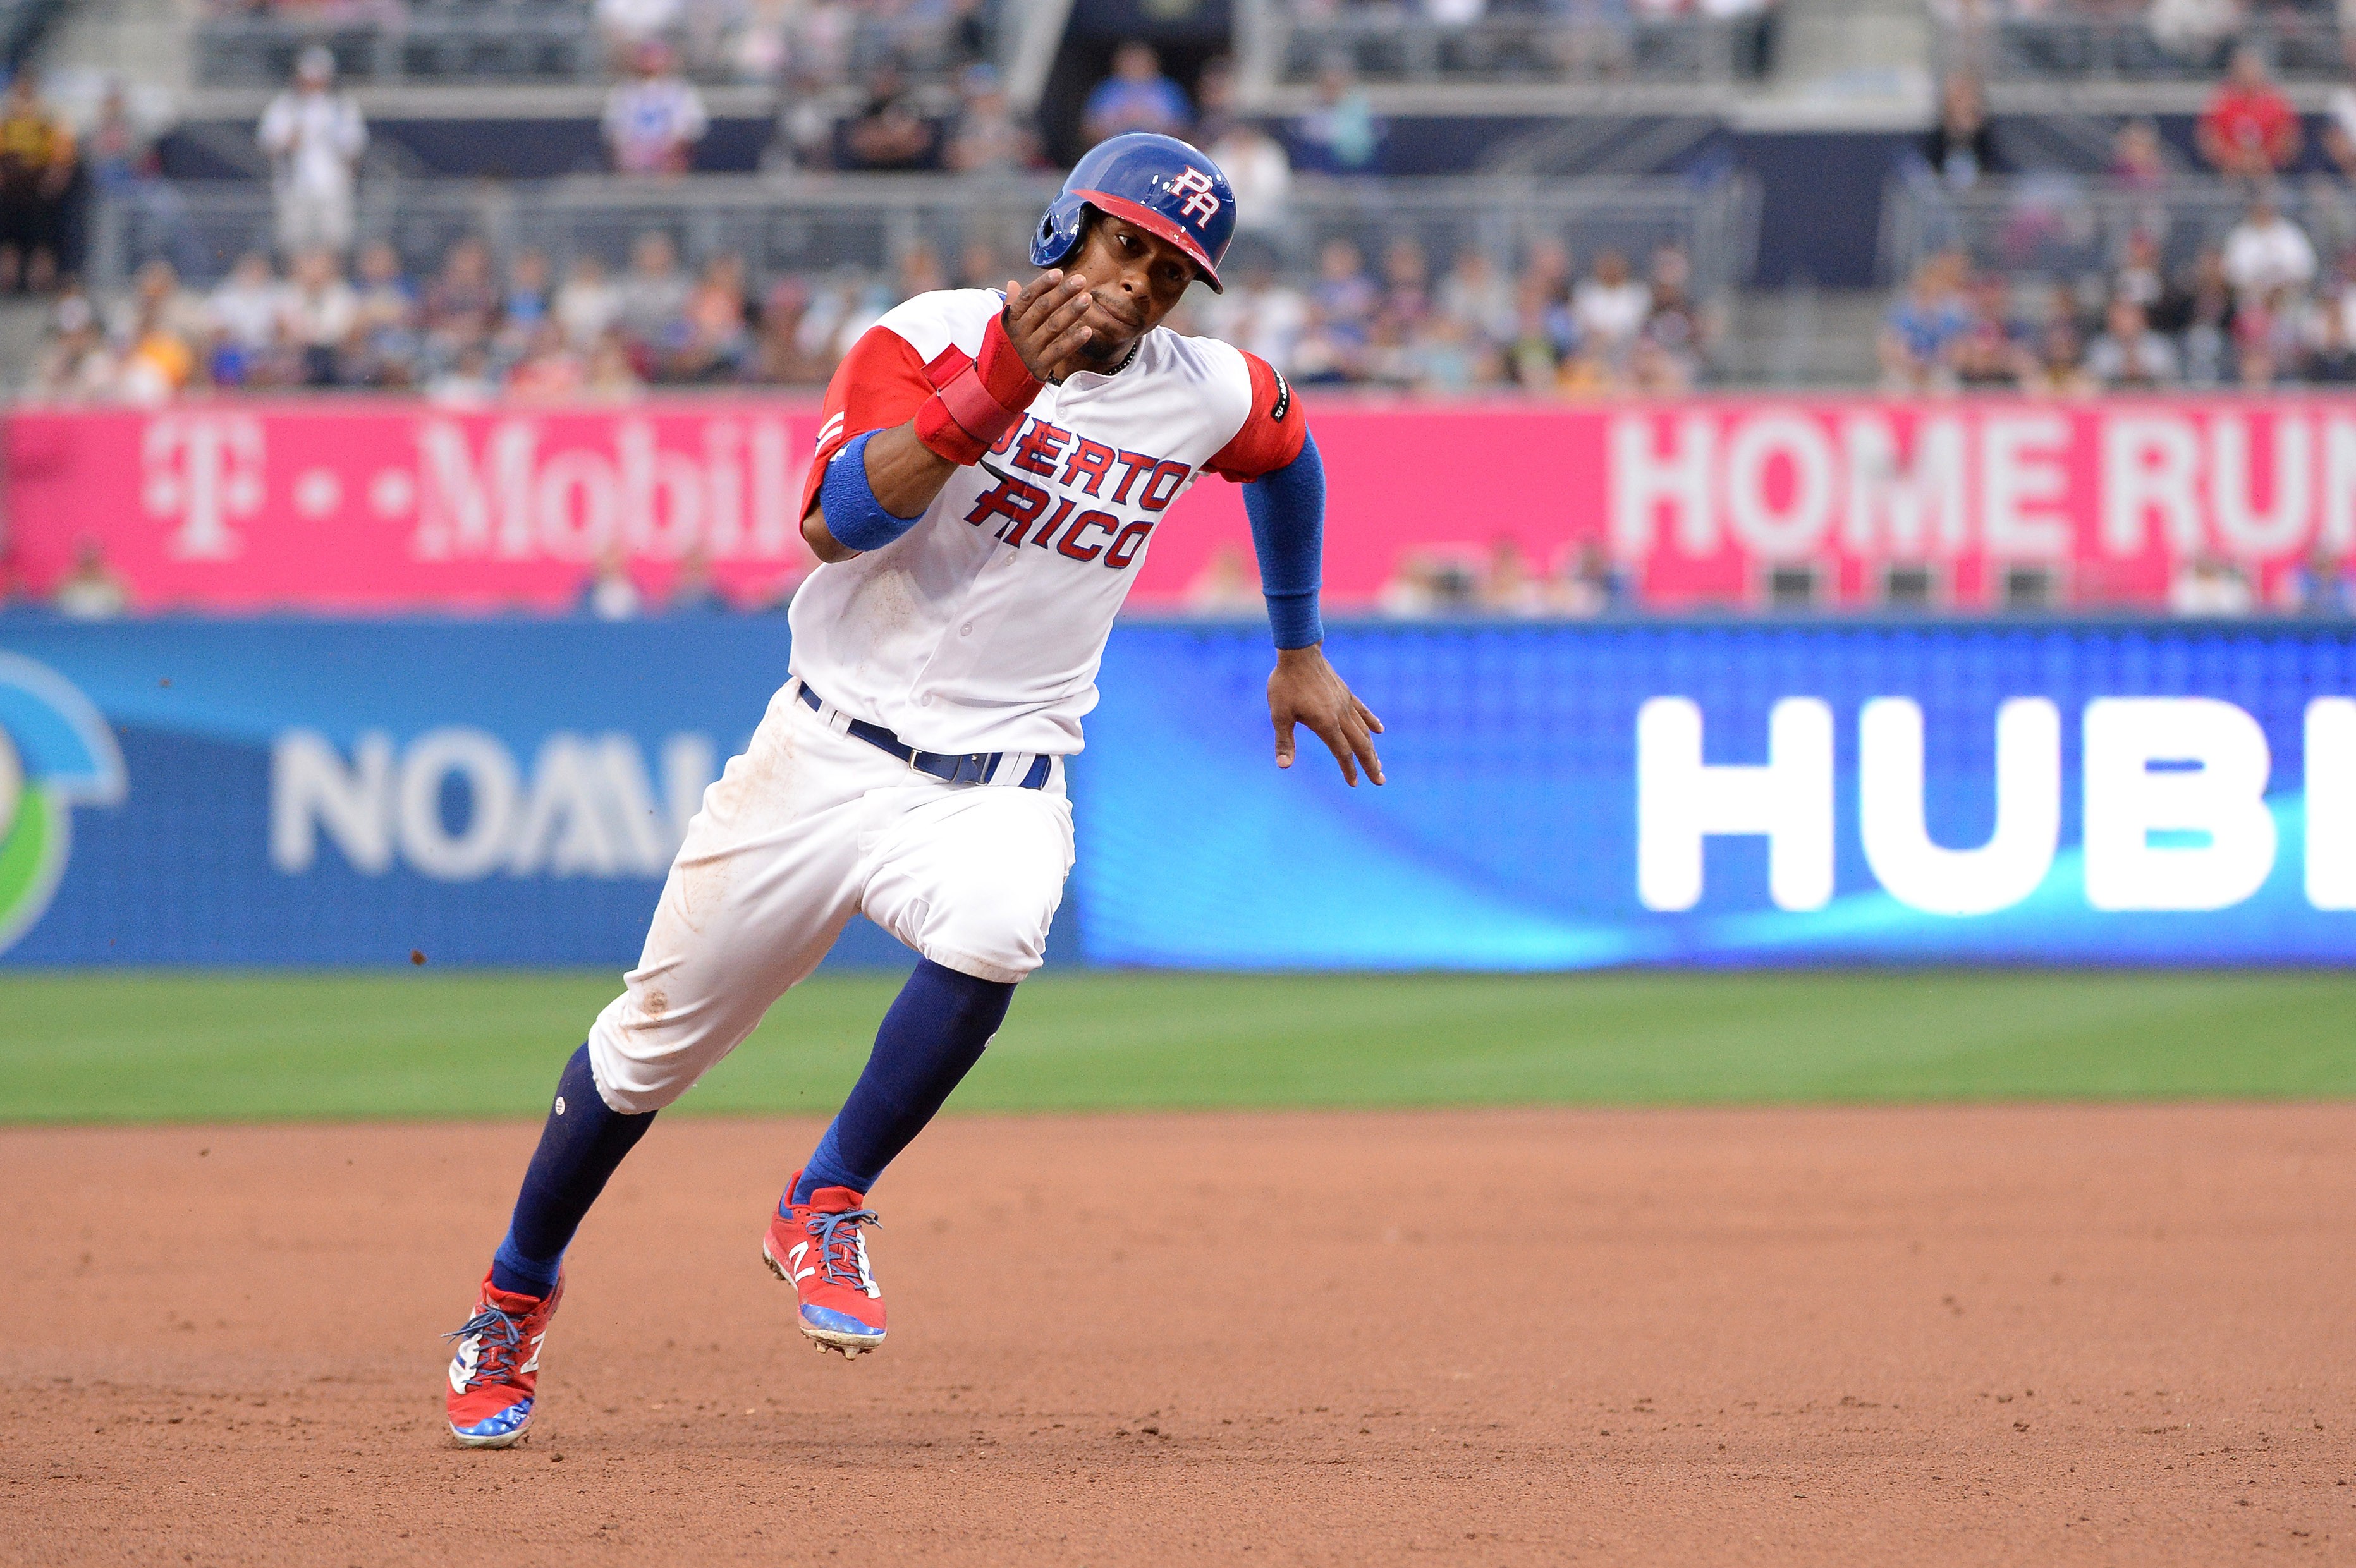 Francisco Lindor can continue to shine in WBC semis